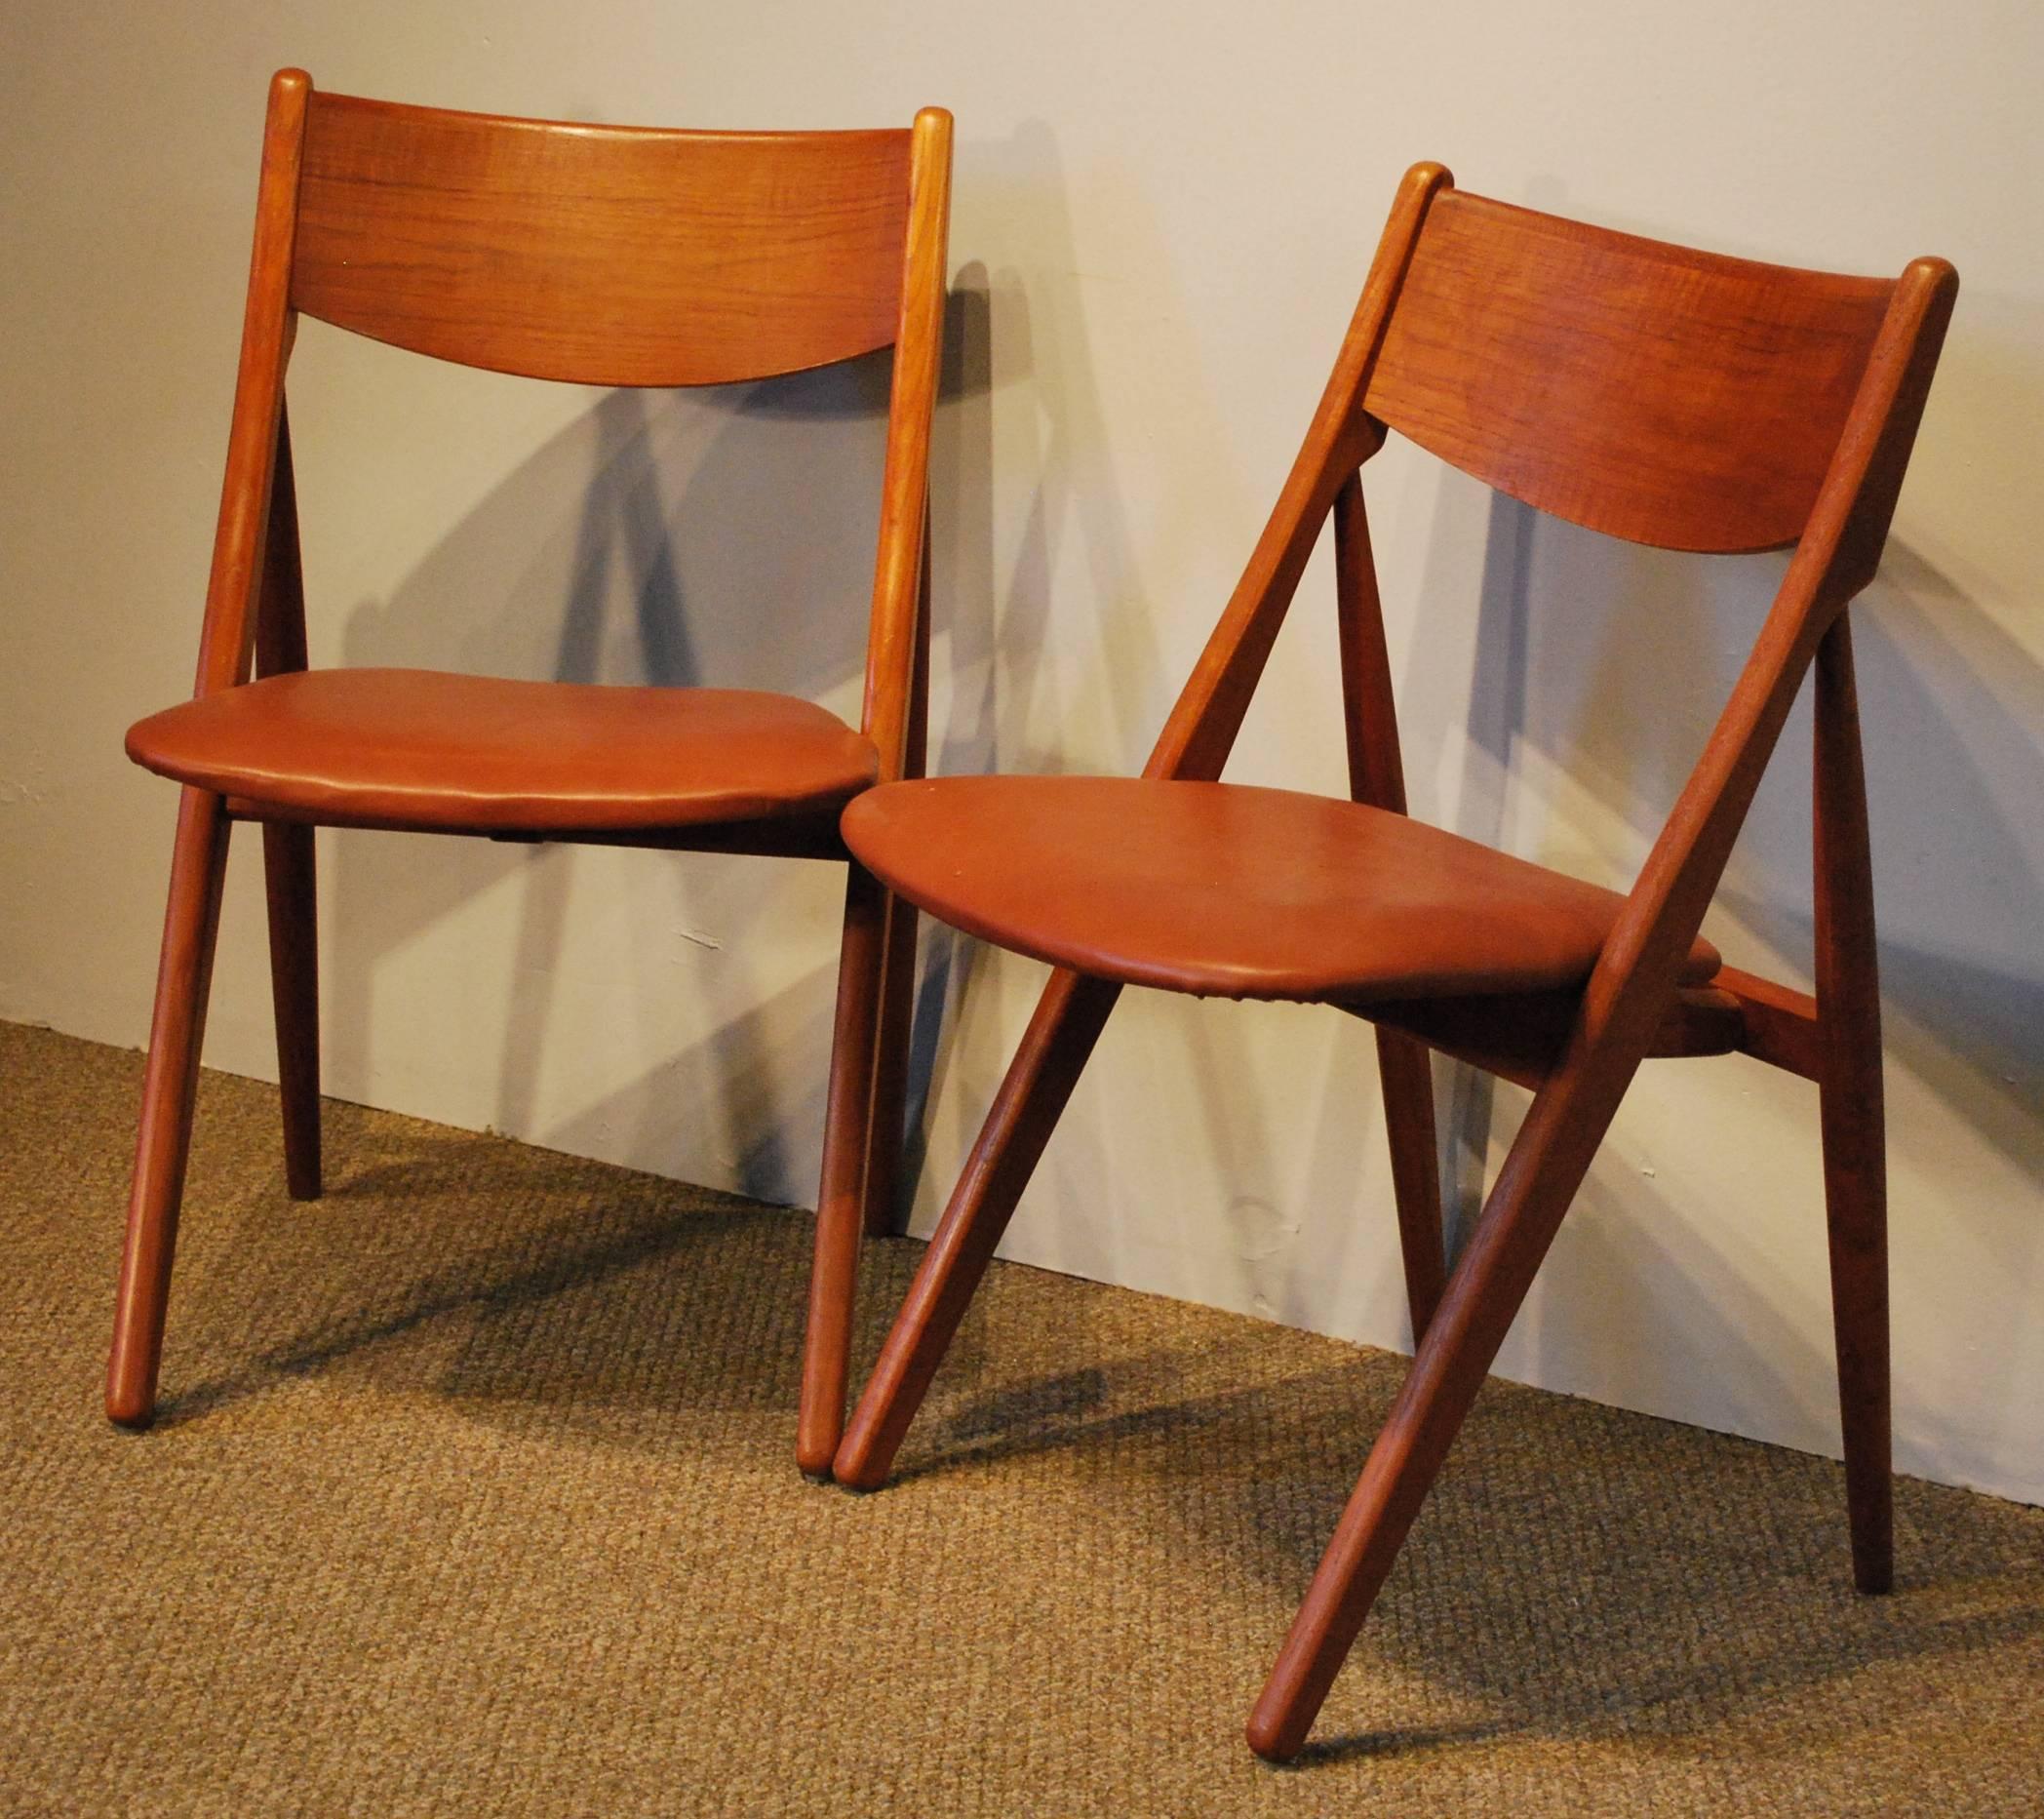 Mid-20th Century Danish Modern Set of Six Teak or Leather Dining Chairs